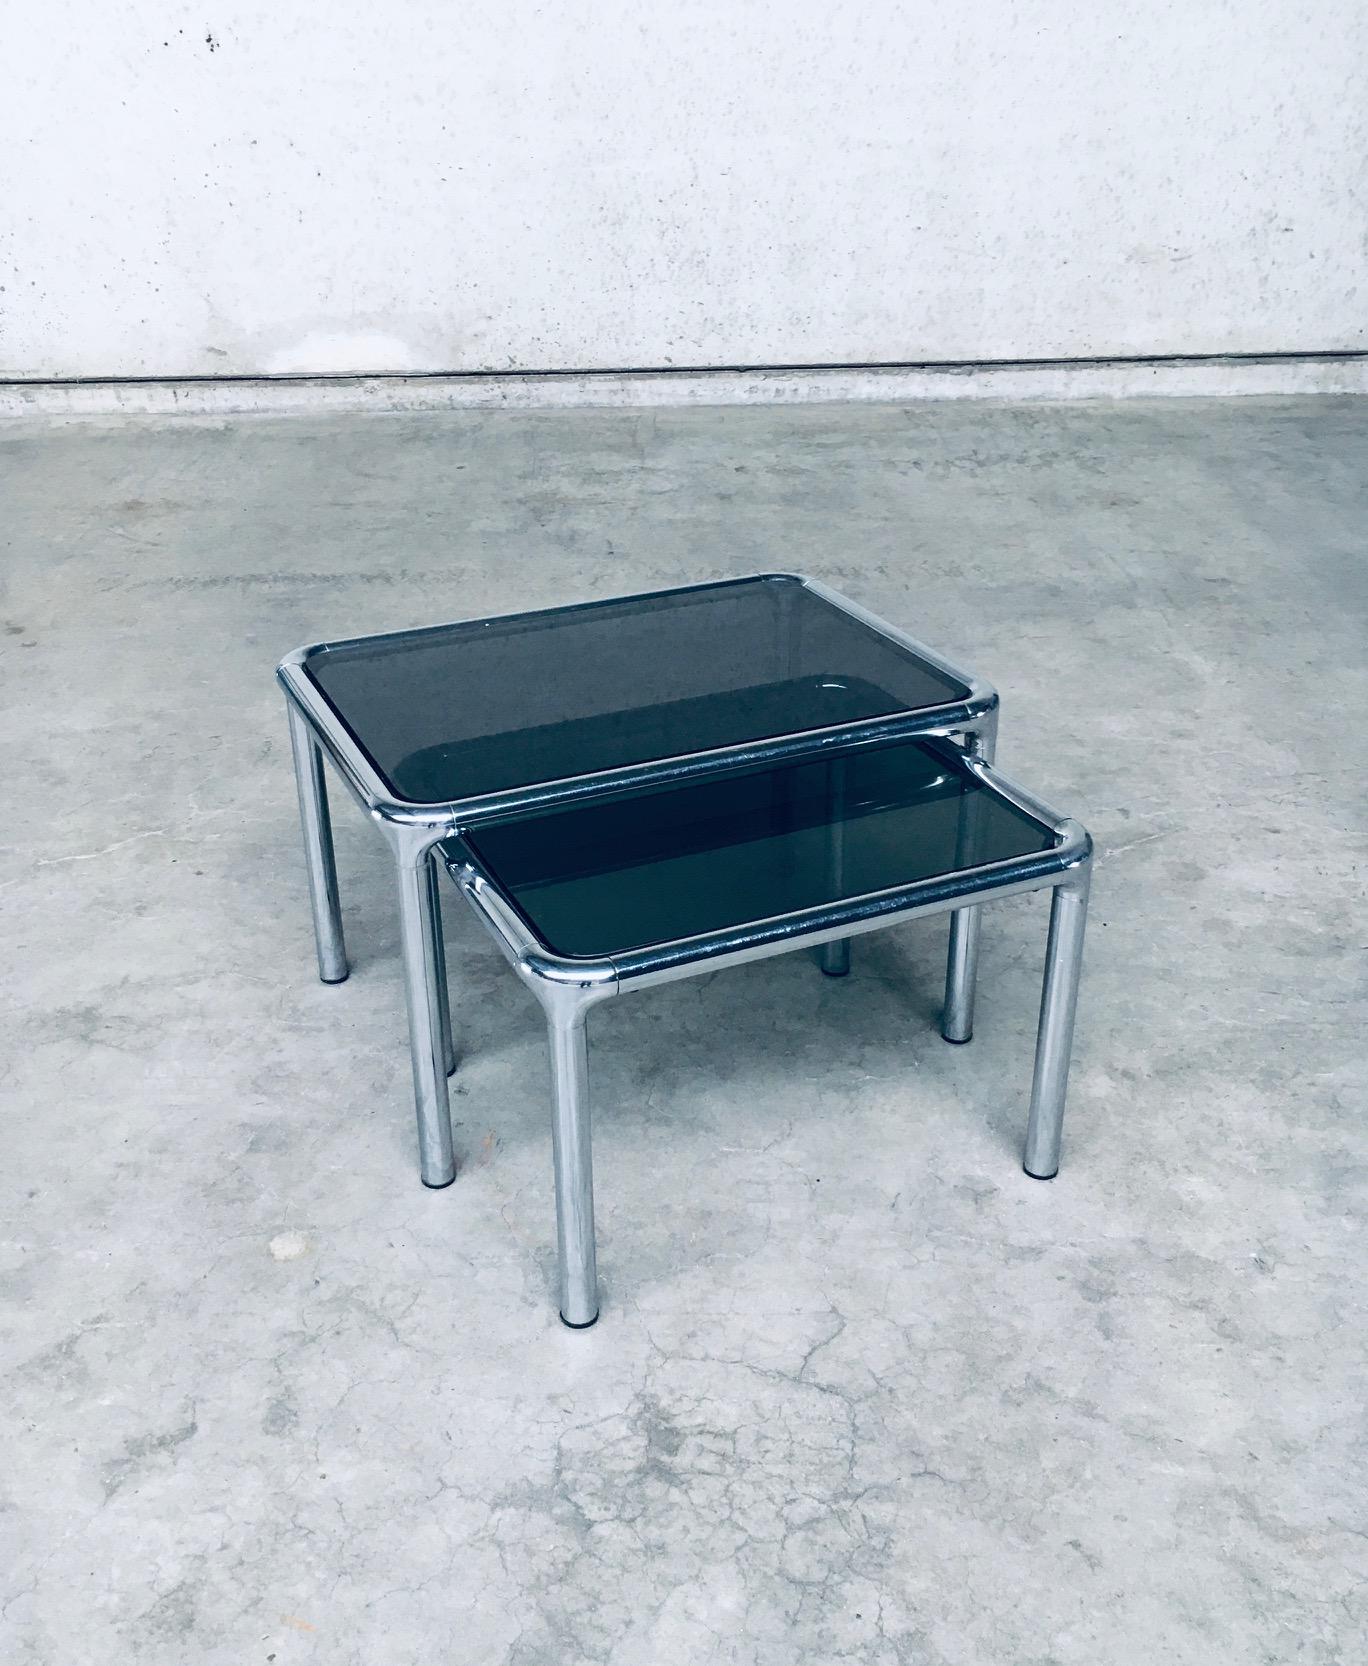 Vintage Midcentury Modern French Design Chrome Steel & Smoked Glass Nesting Table set of 2. Designed by Etienne Fermigier. Made in France, 1970's period. This is a very nice and good designed set. Both tables are in very good condition with minor